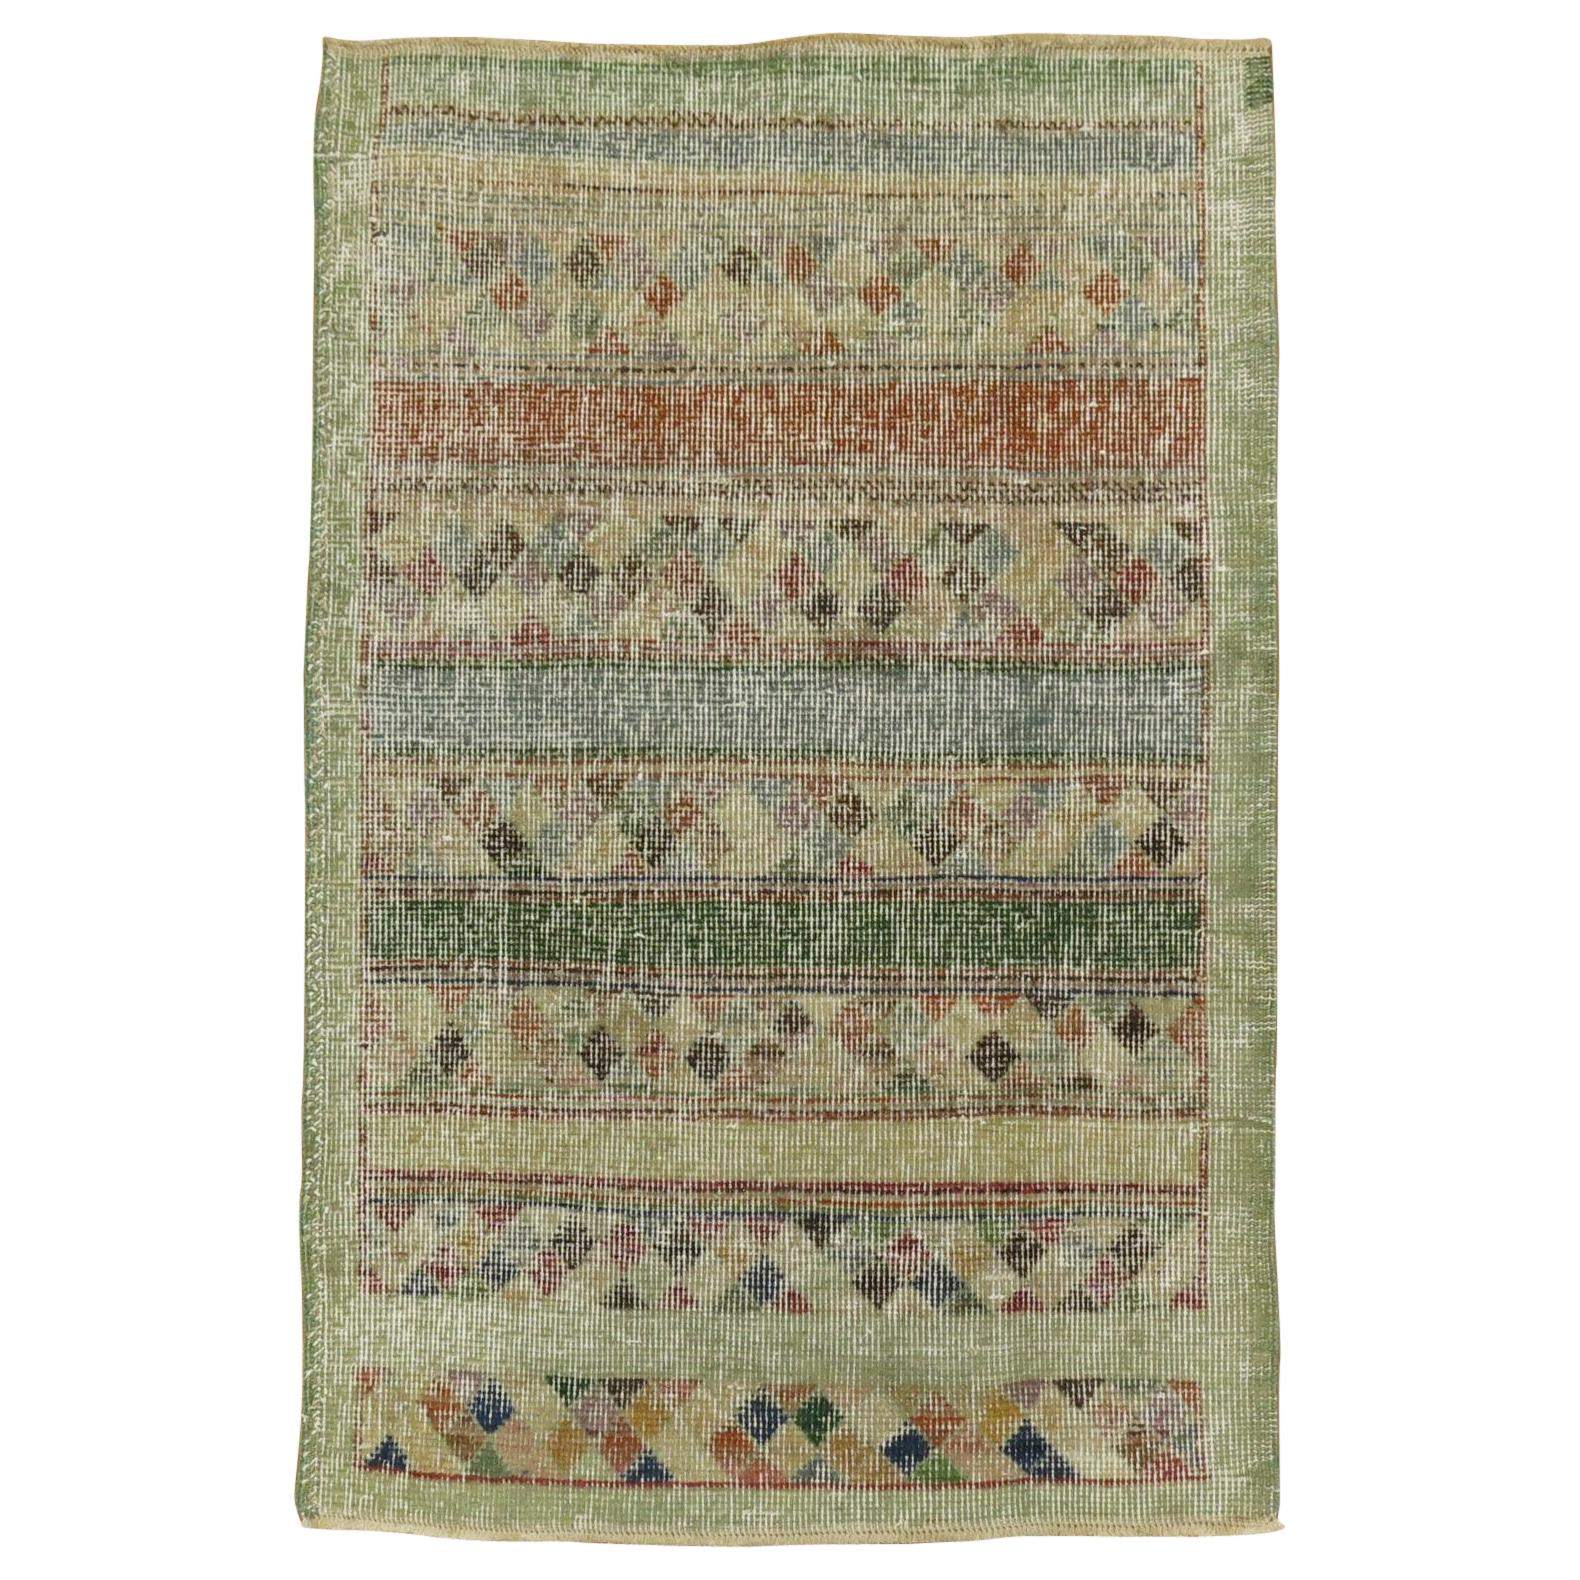 Shabby Chic Turkish Deco Mat For Sale